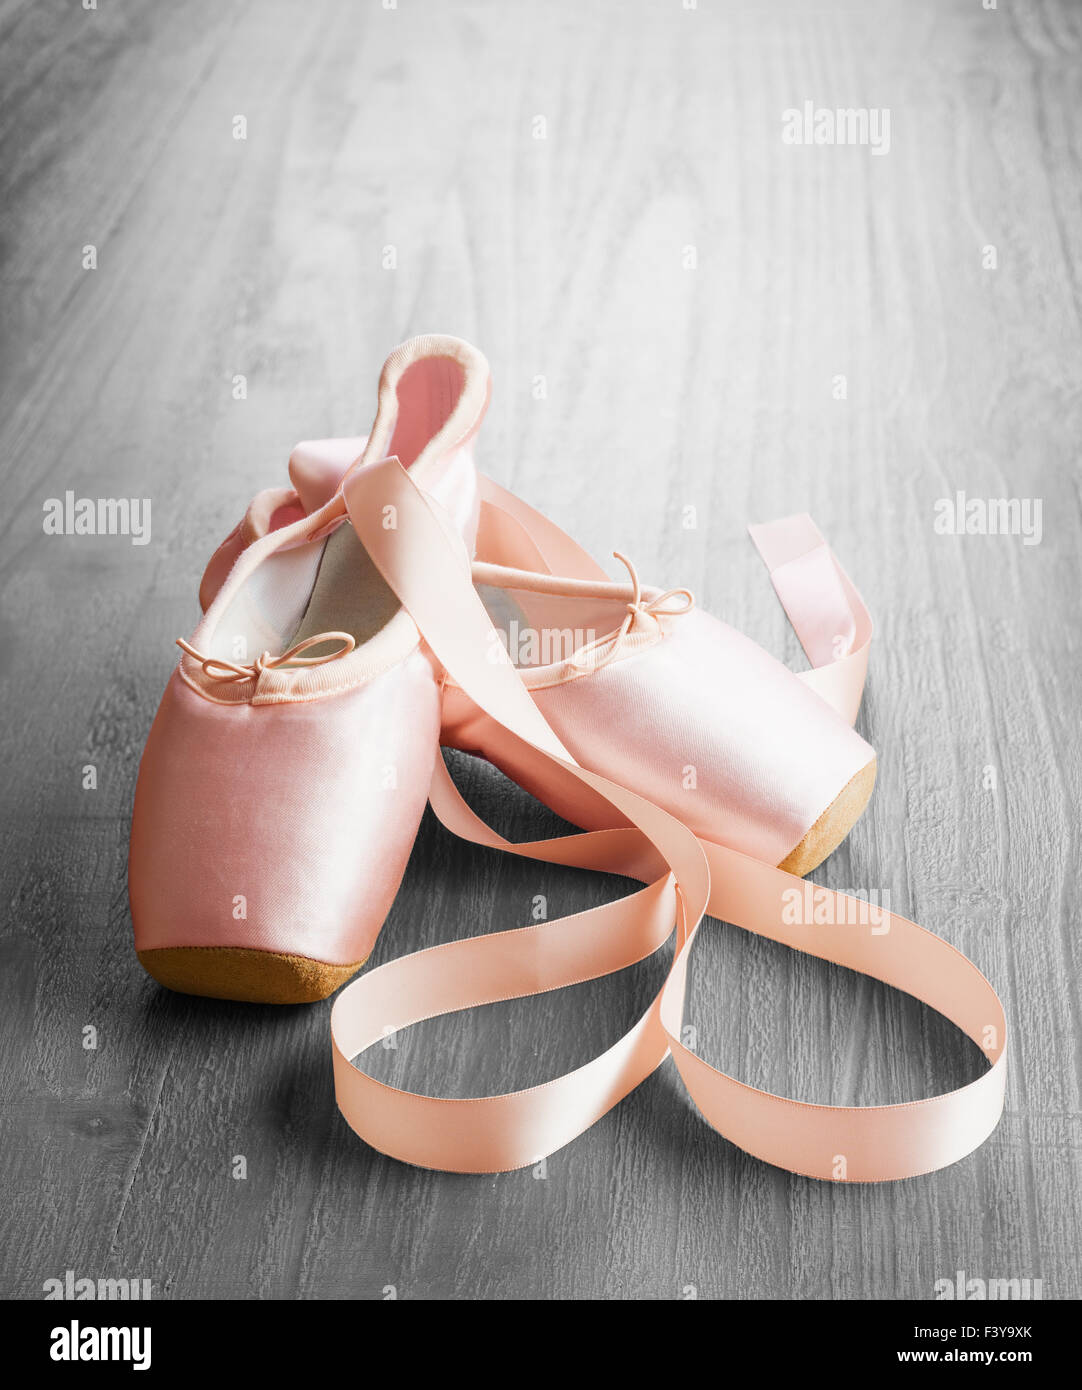 new pink ballet pointe shoes Stock Photo